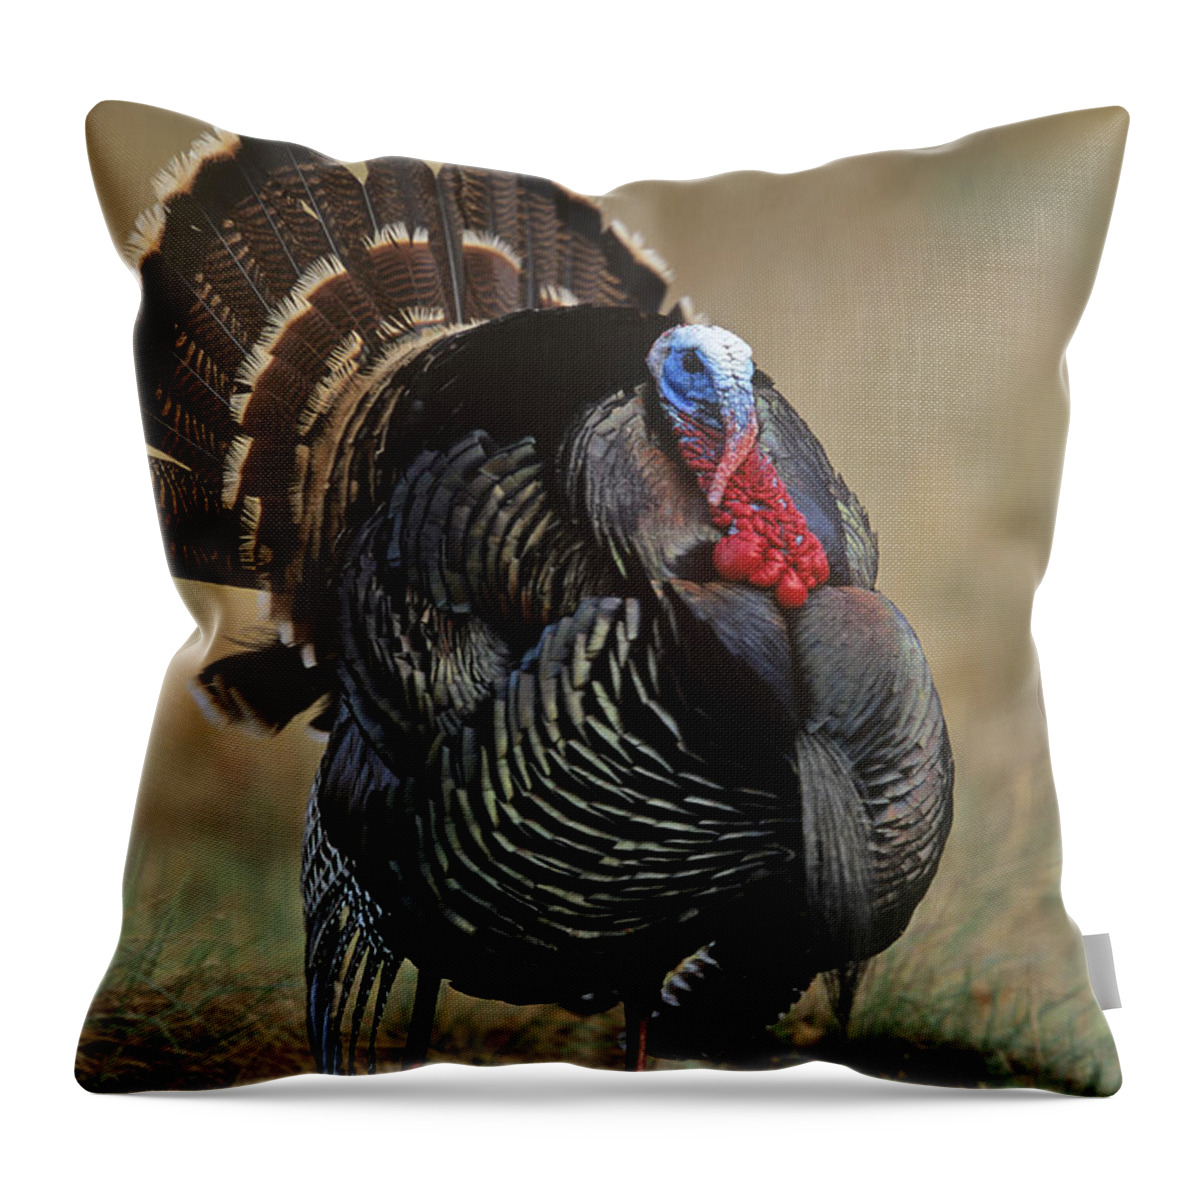 00176644 Throw Pillow featuring the photograph Wild Turkey Male North America by Tim Fitzharris